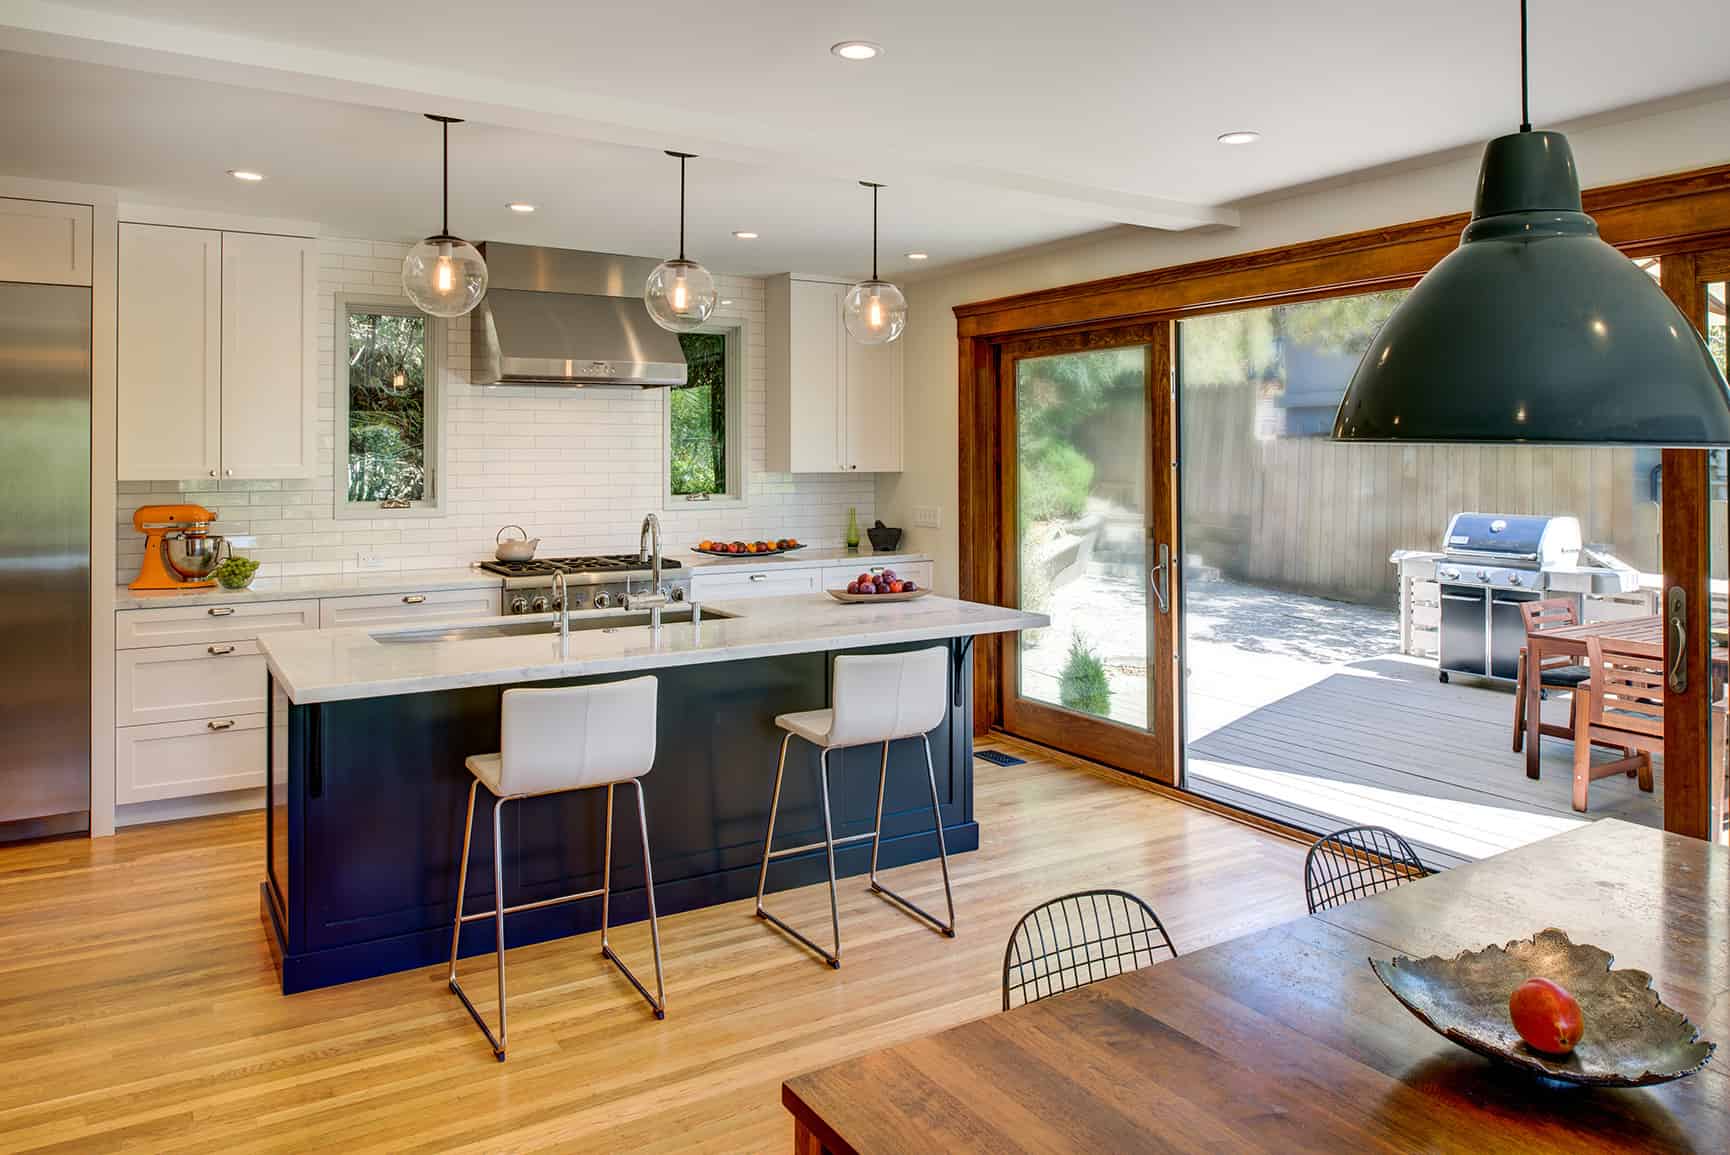 Bright and airy kitchen with views of the exterior.